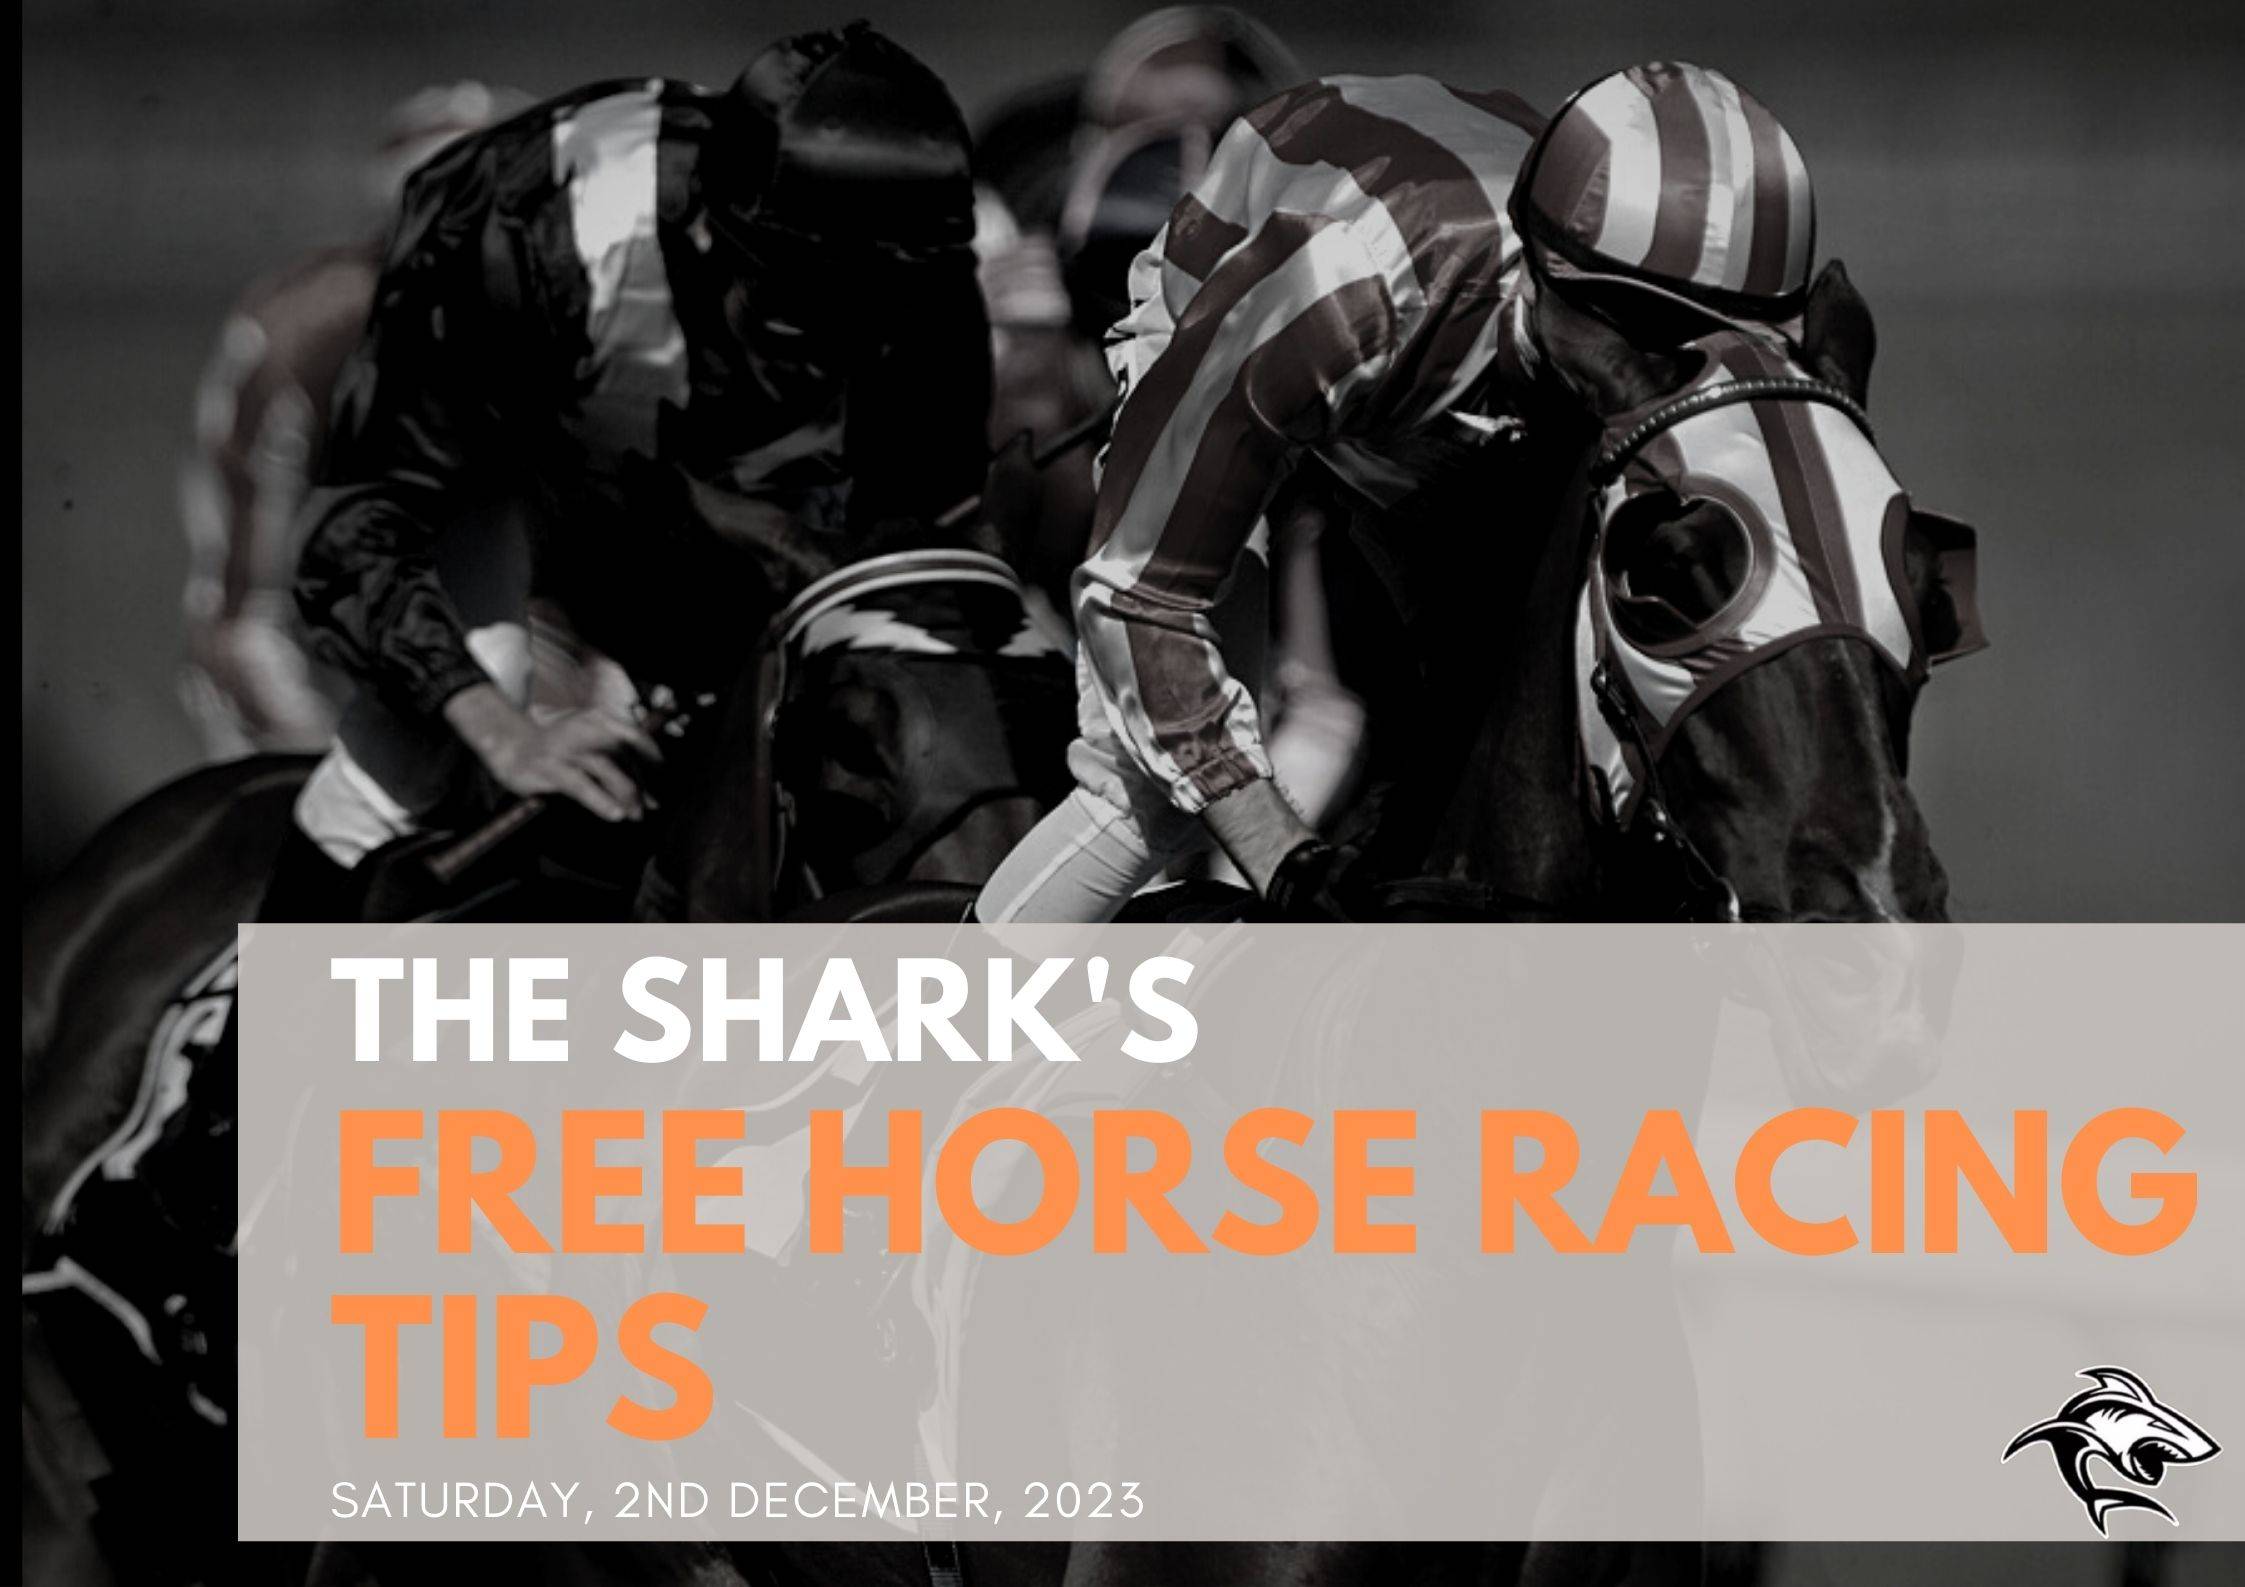 Free Horse Racing Tips - 2nd Dec